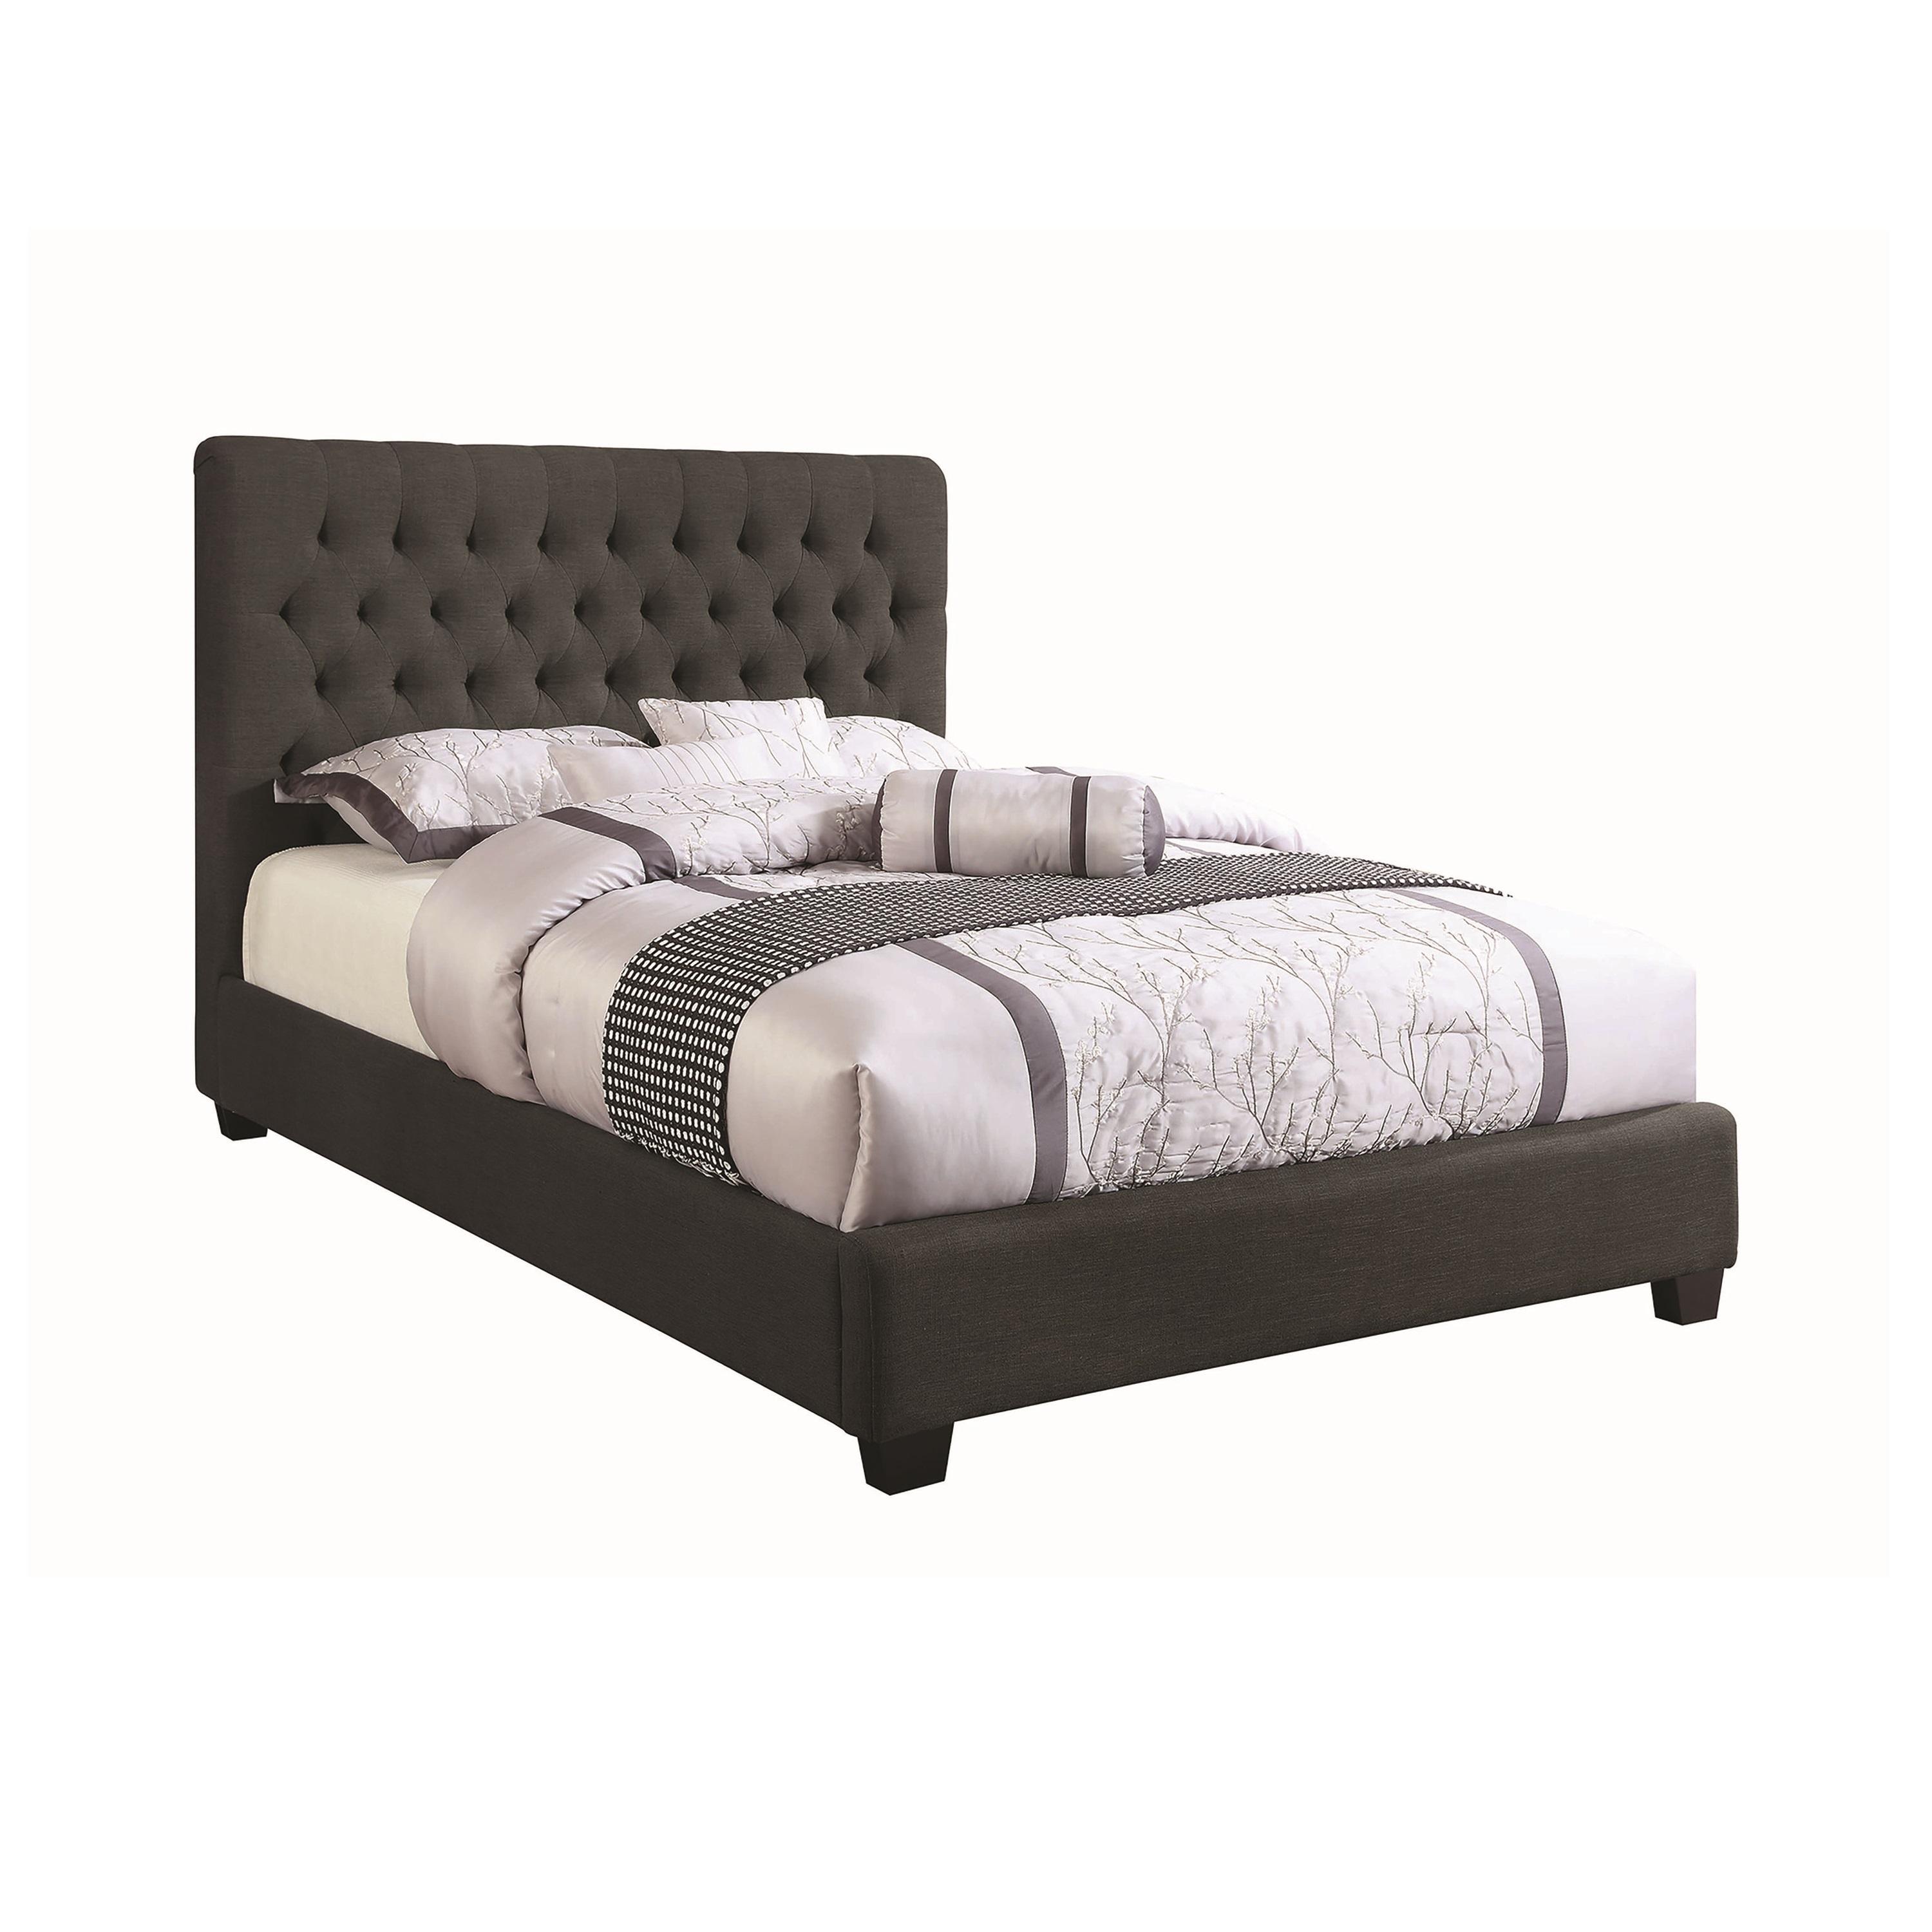 Contemporary Bed 300529KW Chloe 300529KW in Charcoal Fabric